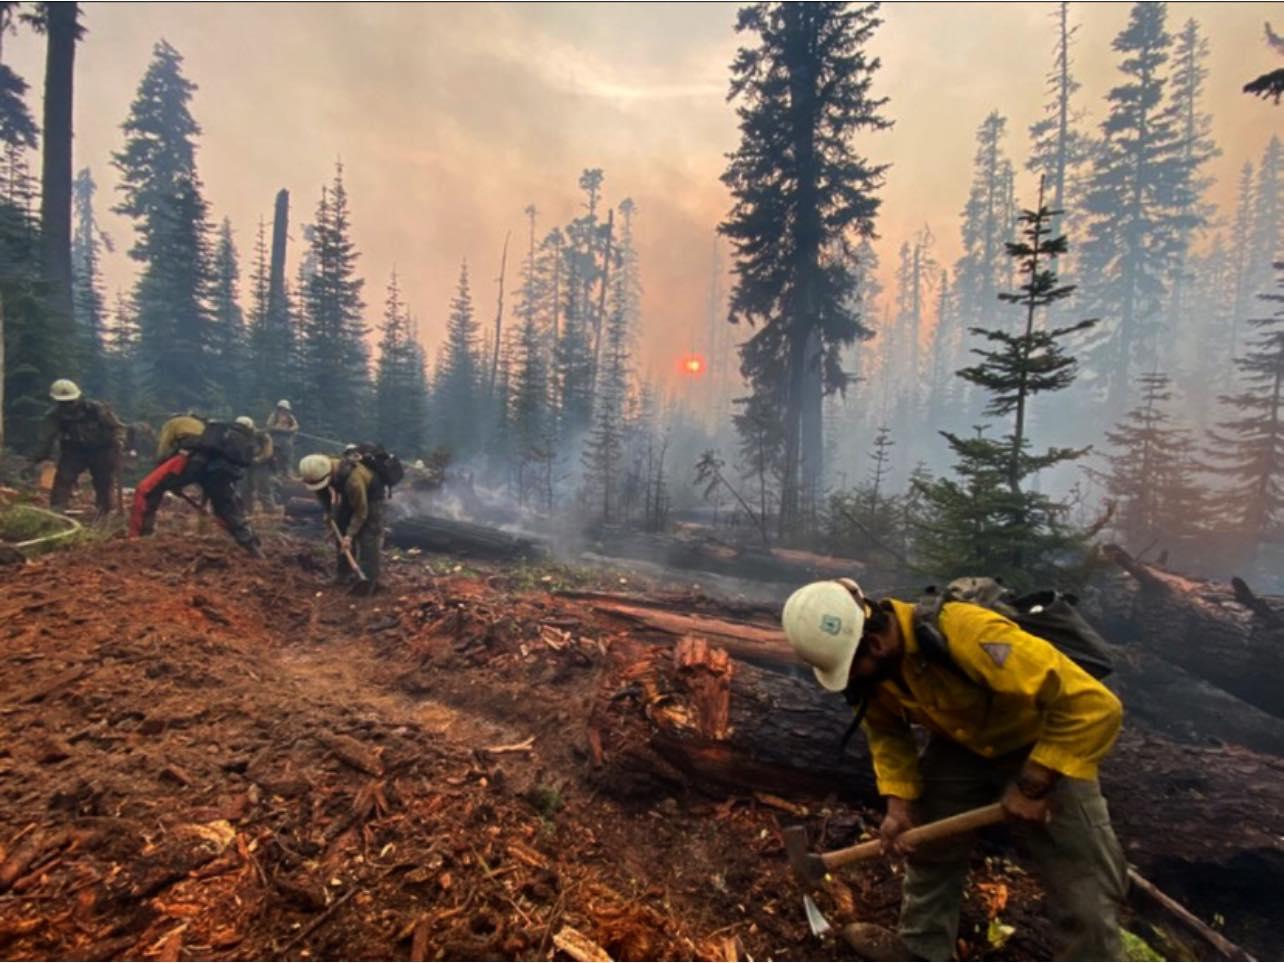 Multiple firefighters in white hardhats and yellow shirts use tools to dig line in the ground to remove all vegetation and have a strip of mineral soil along the fires edge. Smoke rises though the trees with a hazy, orange sun in the cloudy sky.